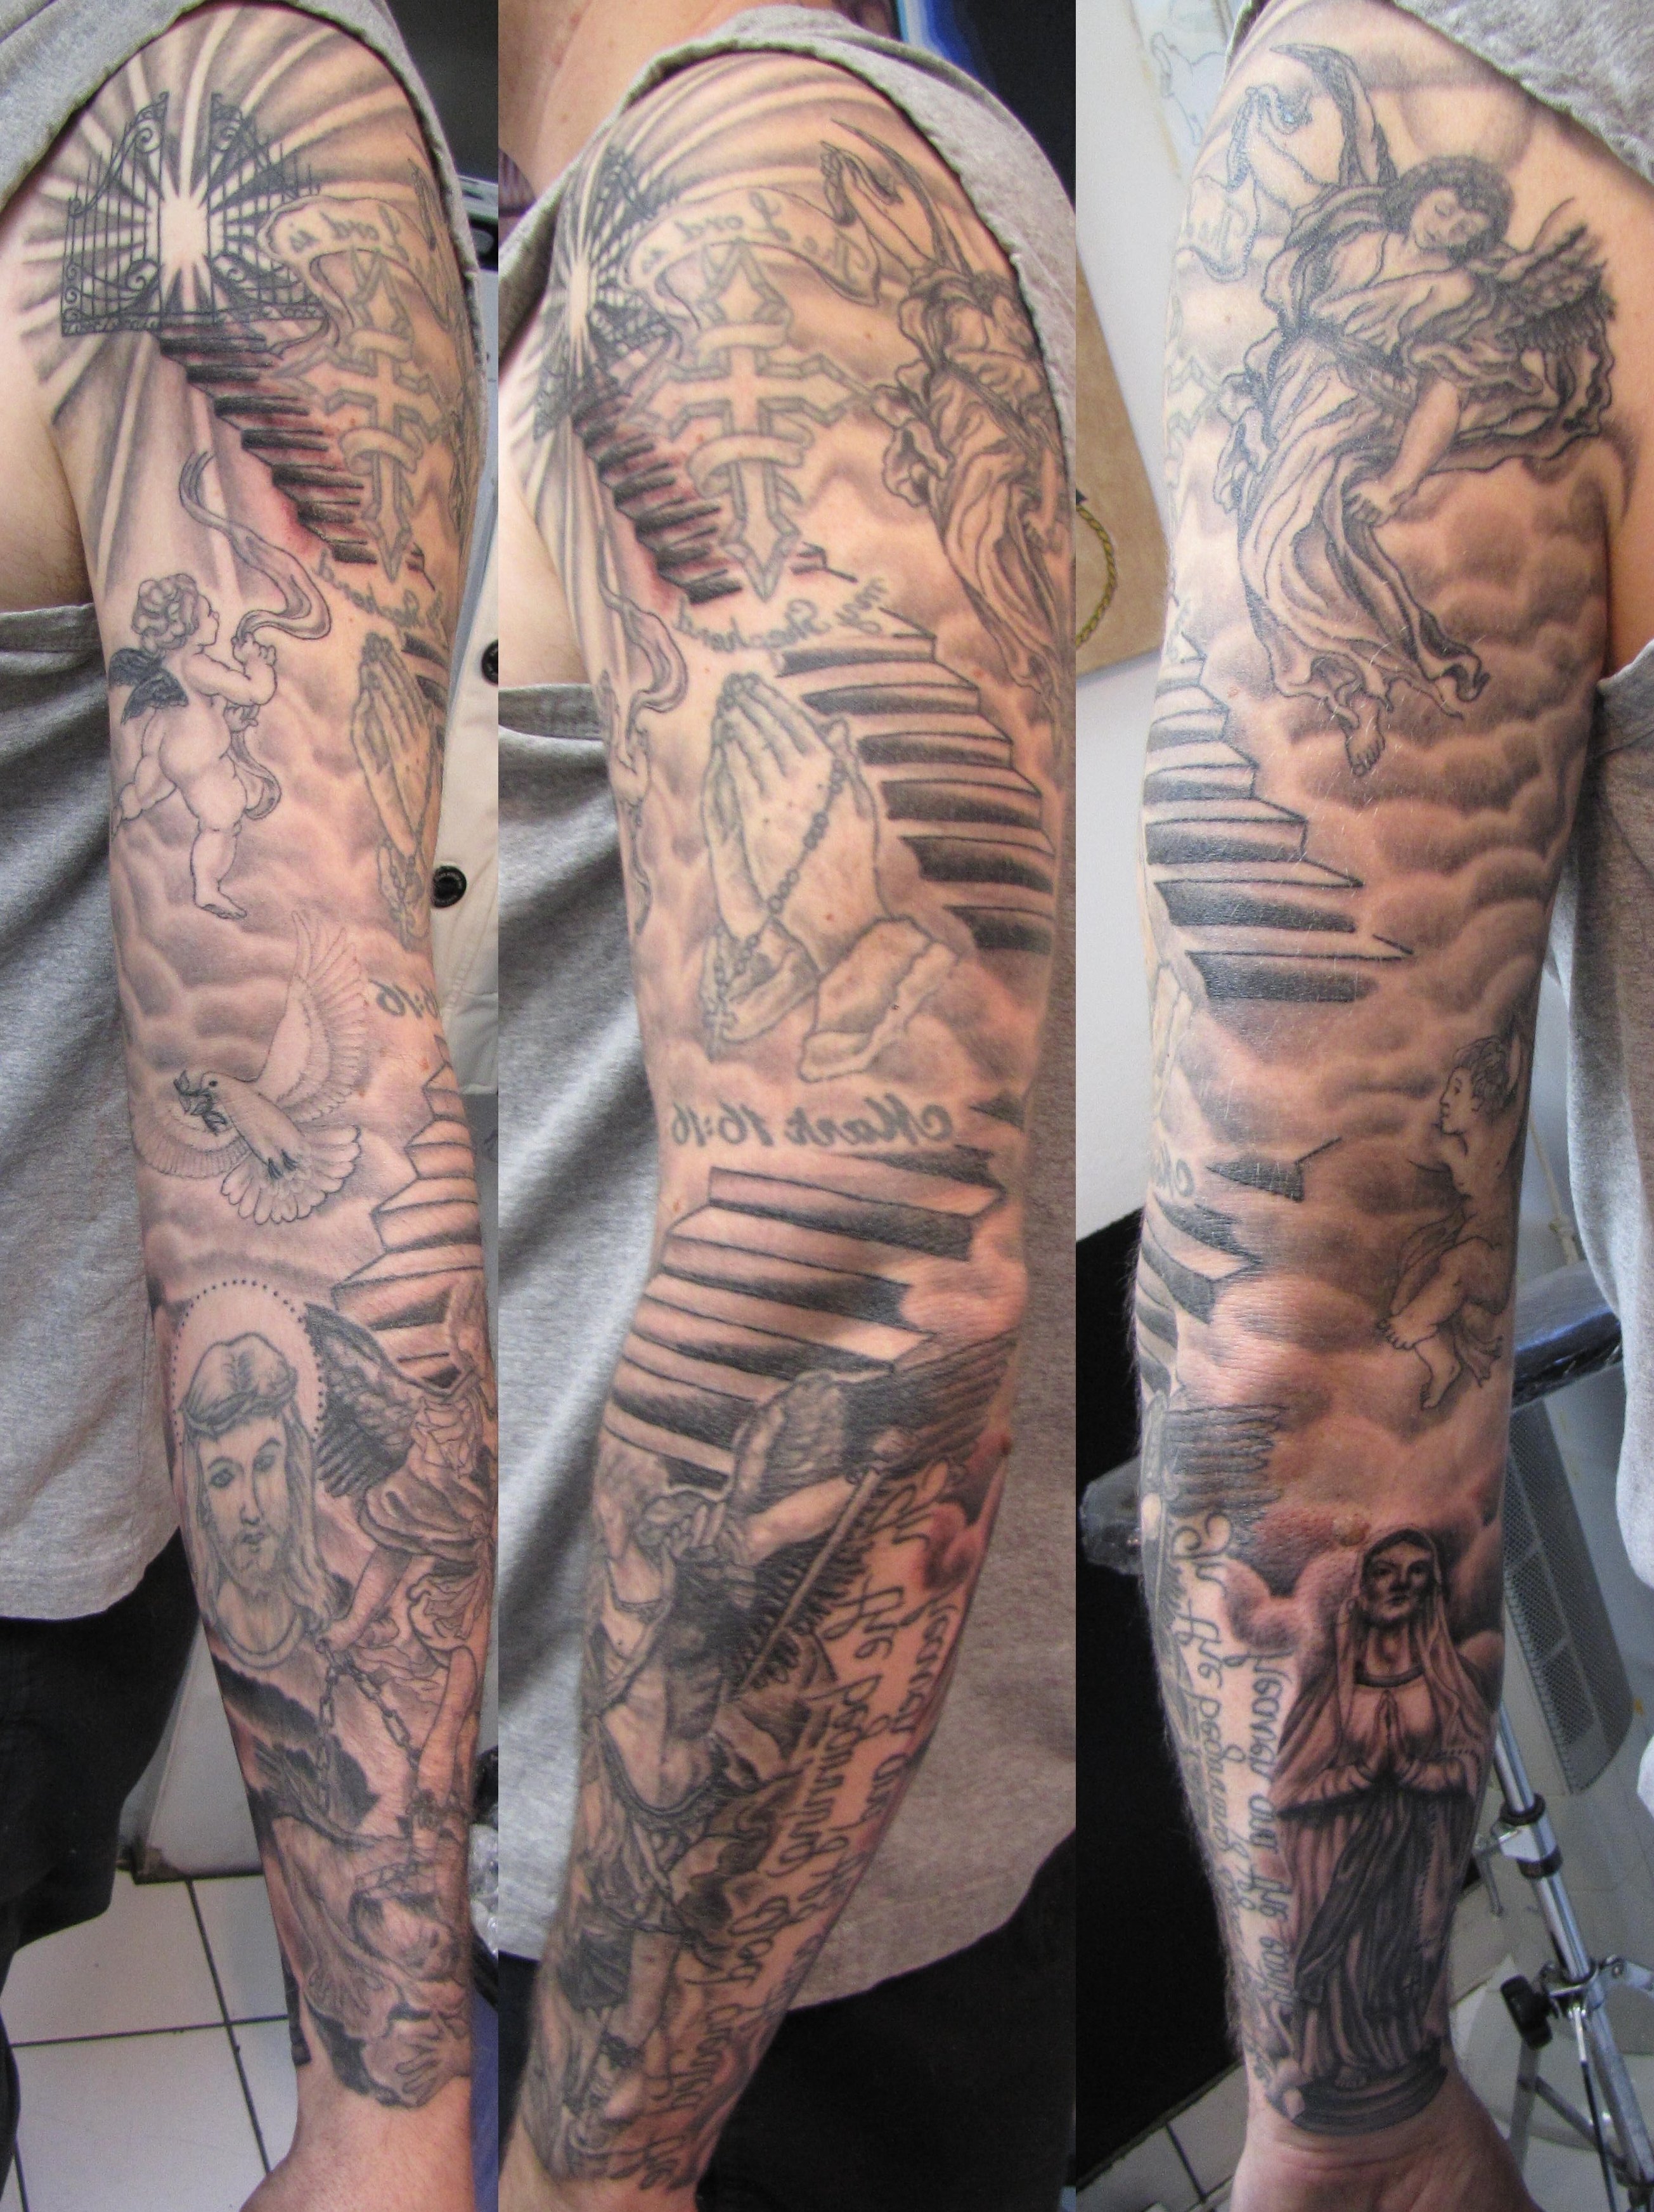 Arm Sleeve Tattoo Ideas 125+ sleeve tattoos for men and women designs